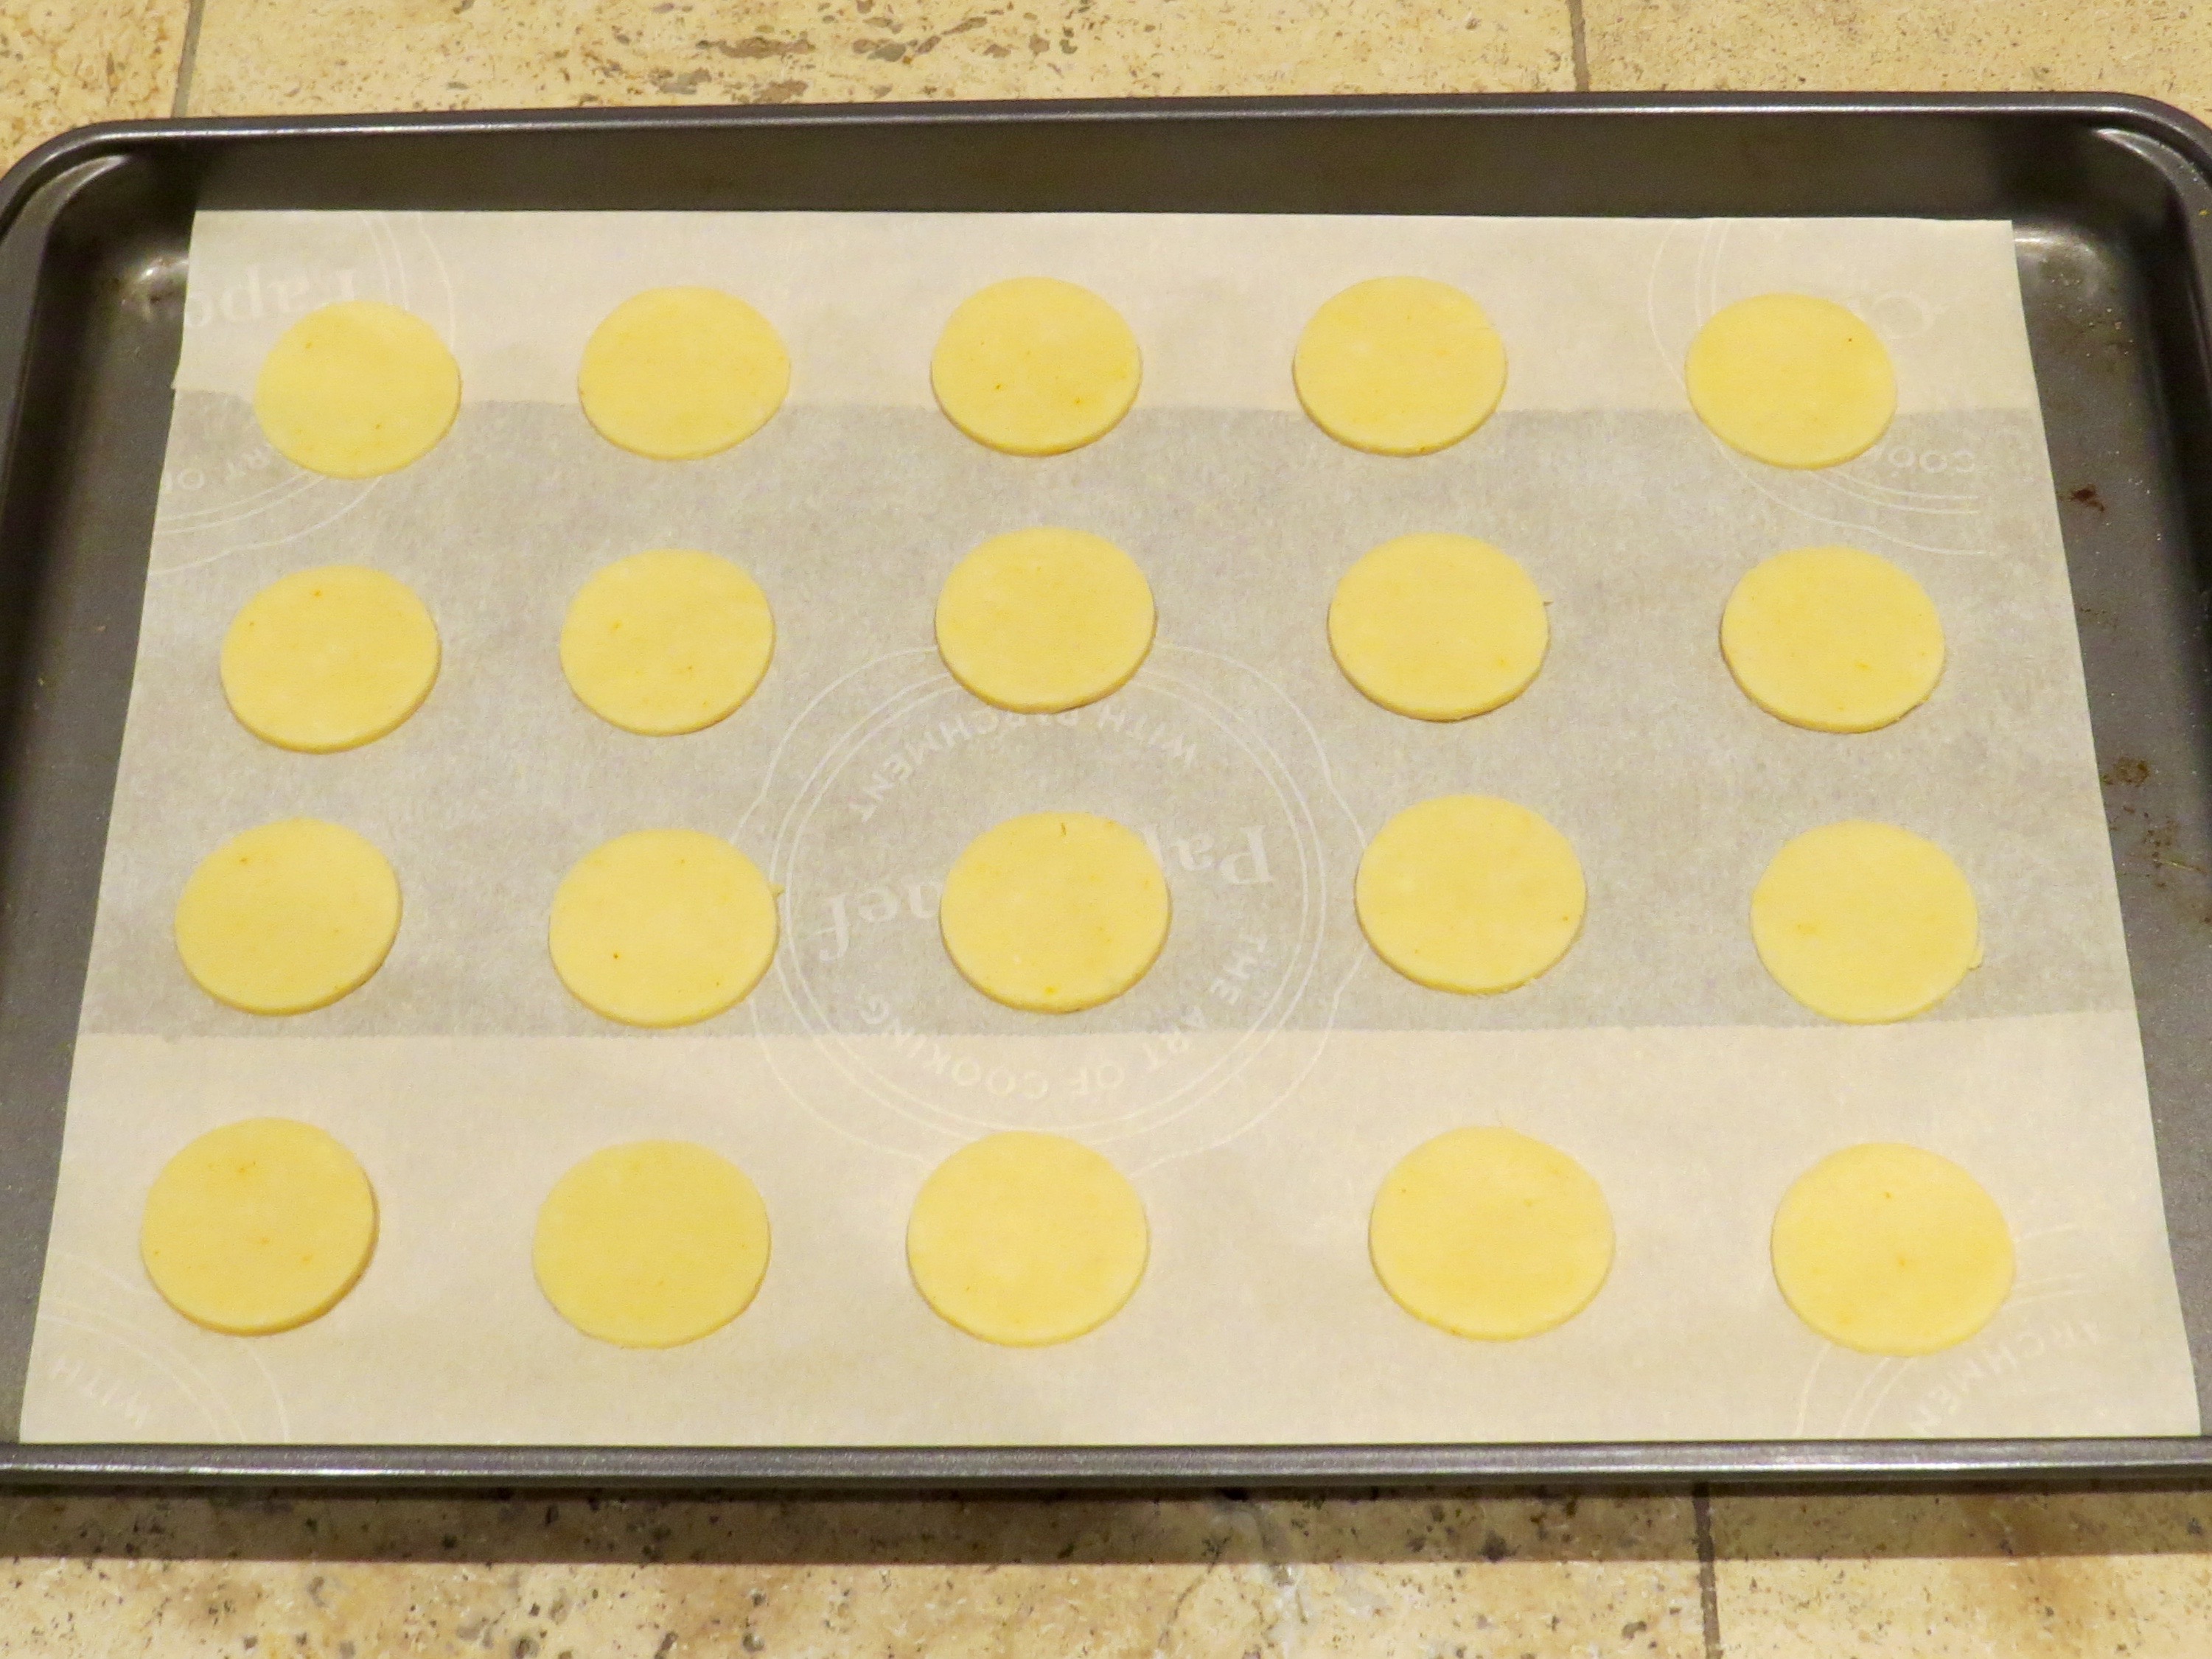 The Cheez-it-ish Crackers are ready to bake in the oven.